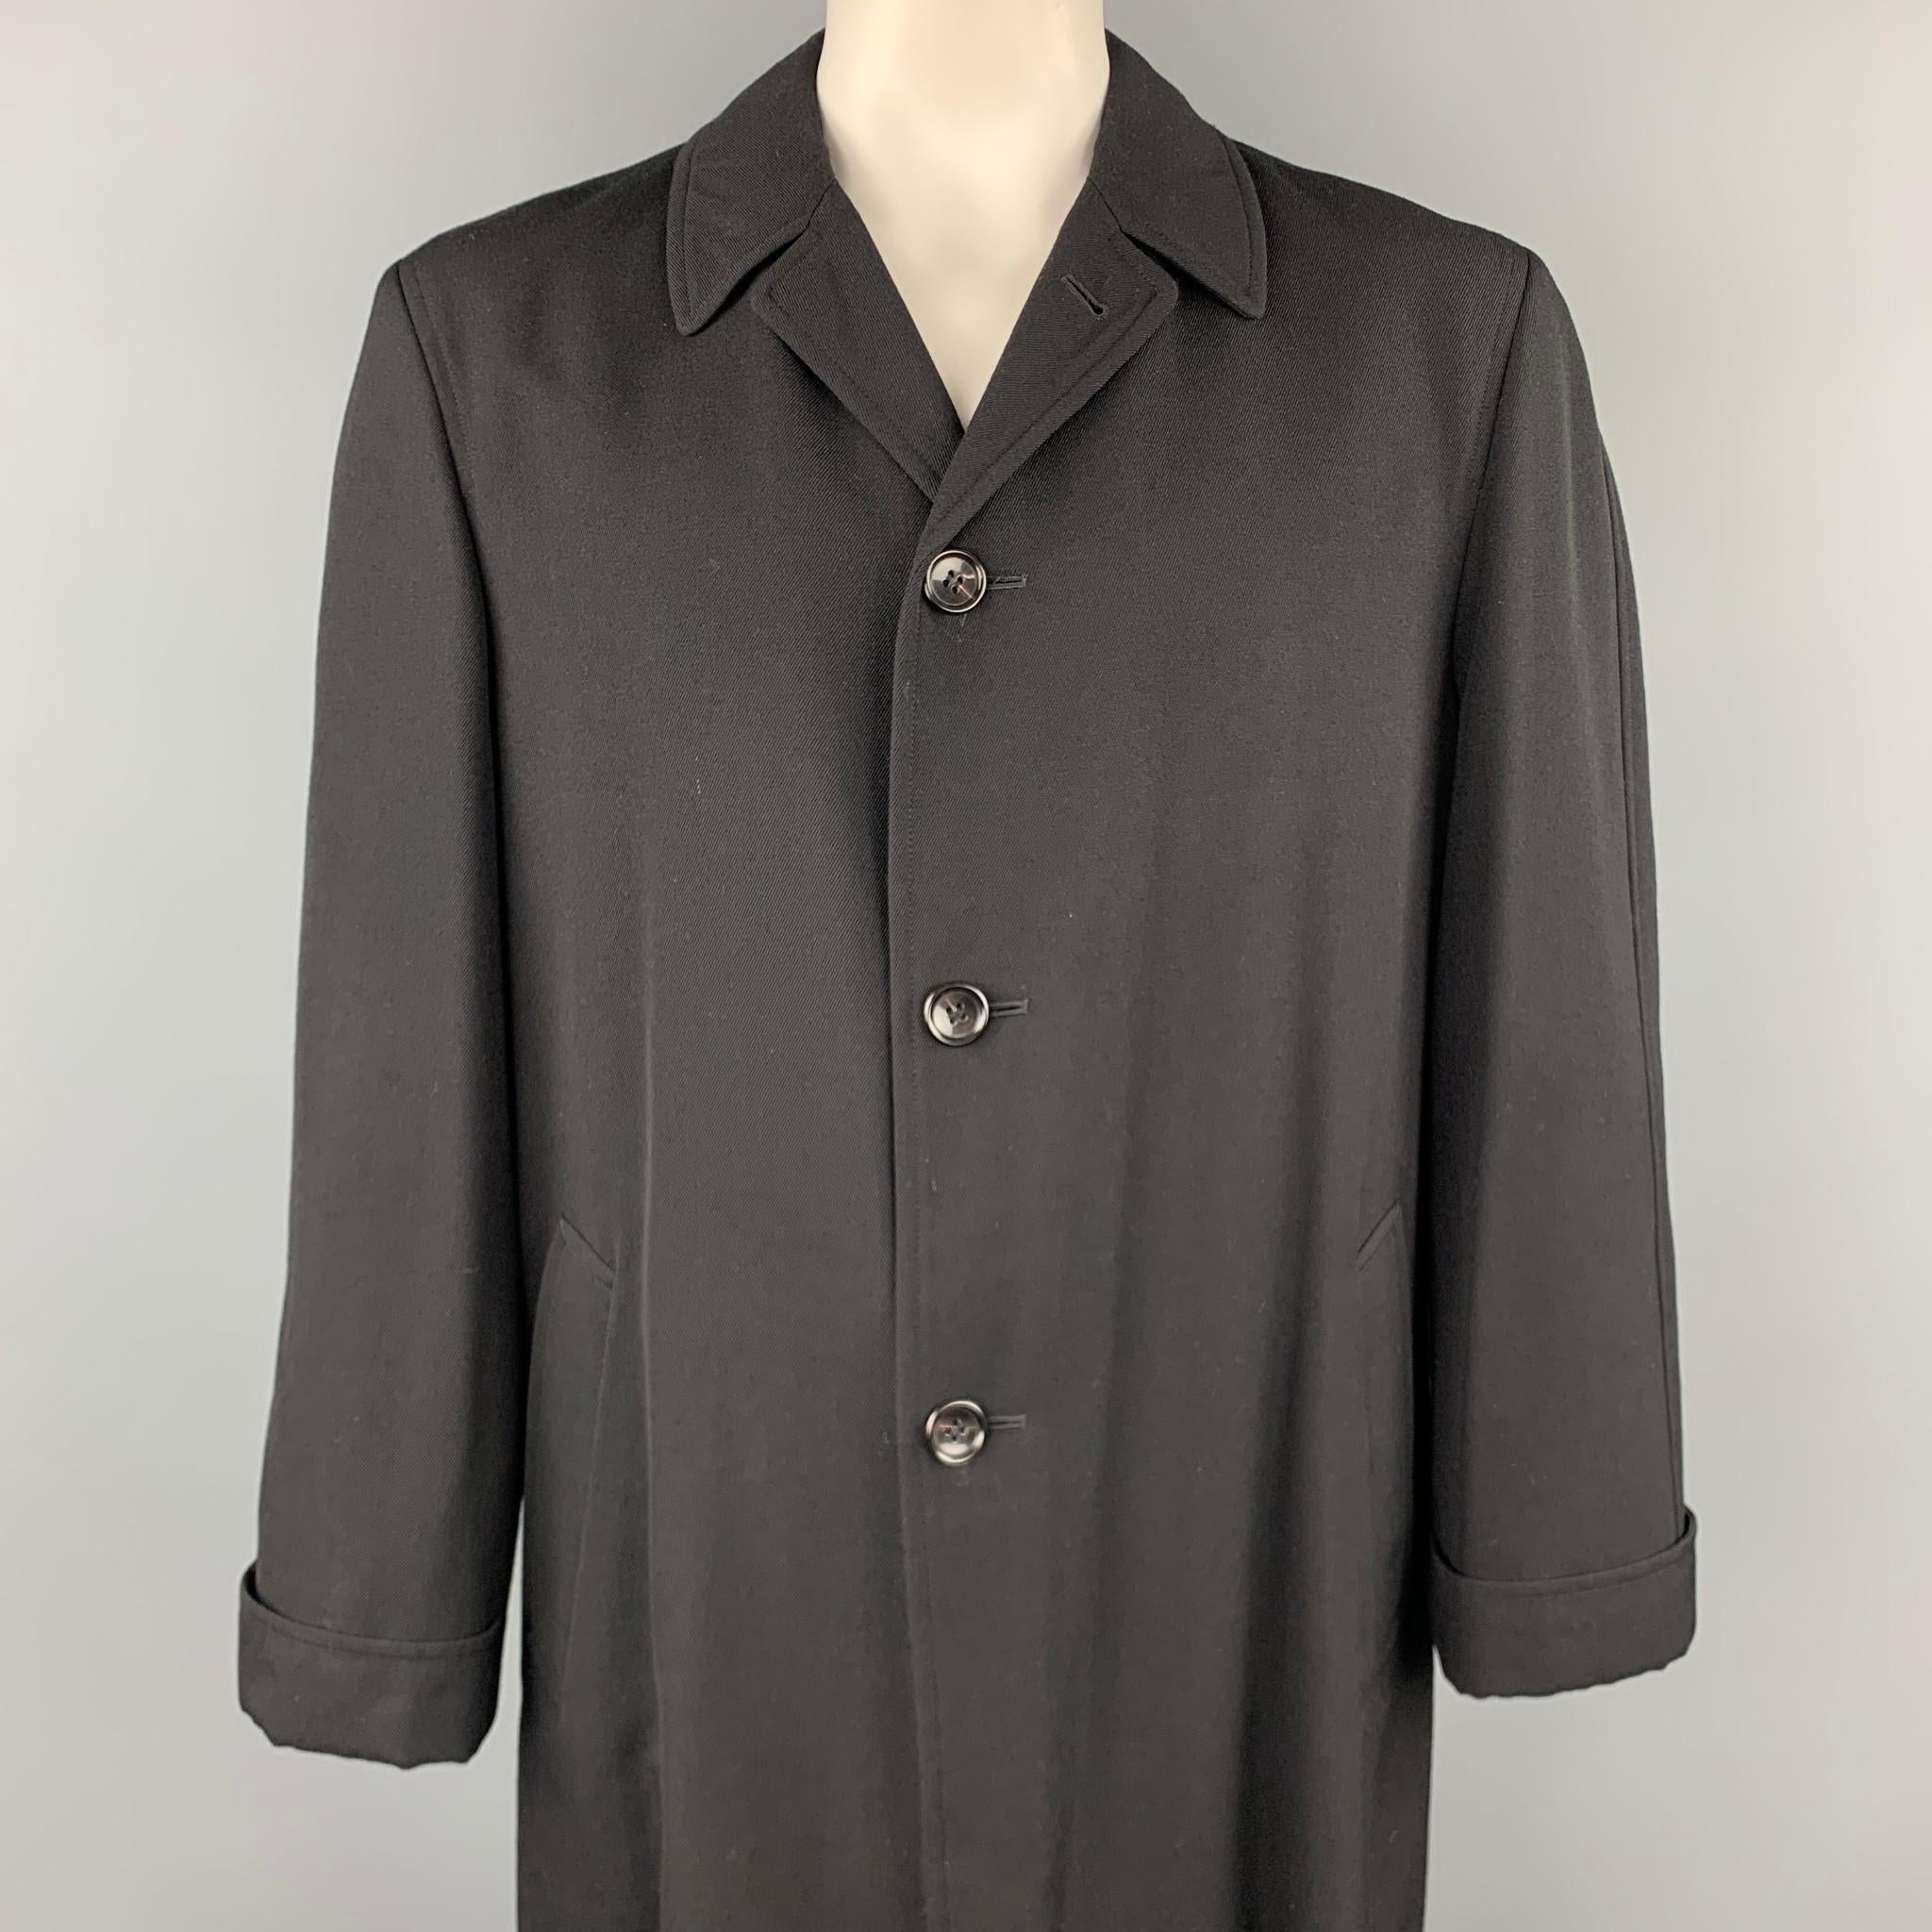 COMME des GARCONS HOMME PLUS coat comes in a black wool with a half liner featuring a half cuffed sleeve, slit pockets, spread collar, and a buttoned closure. Made in Japan.

Excellent Pre-Owned Condition.
Marked: L

Measurements:

Shoulder: 18.5